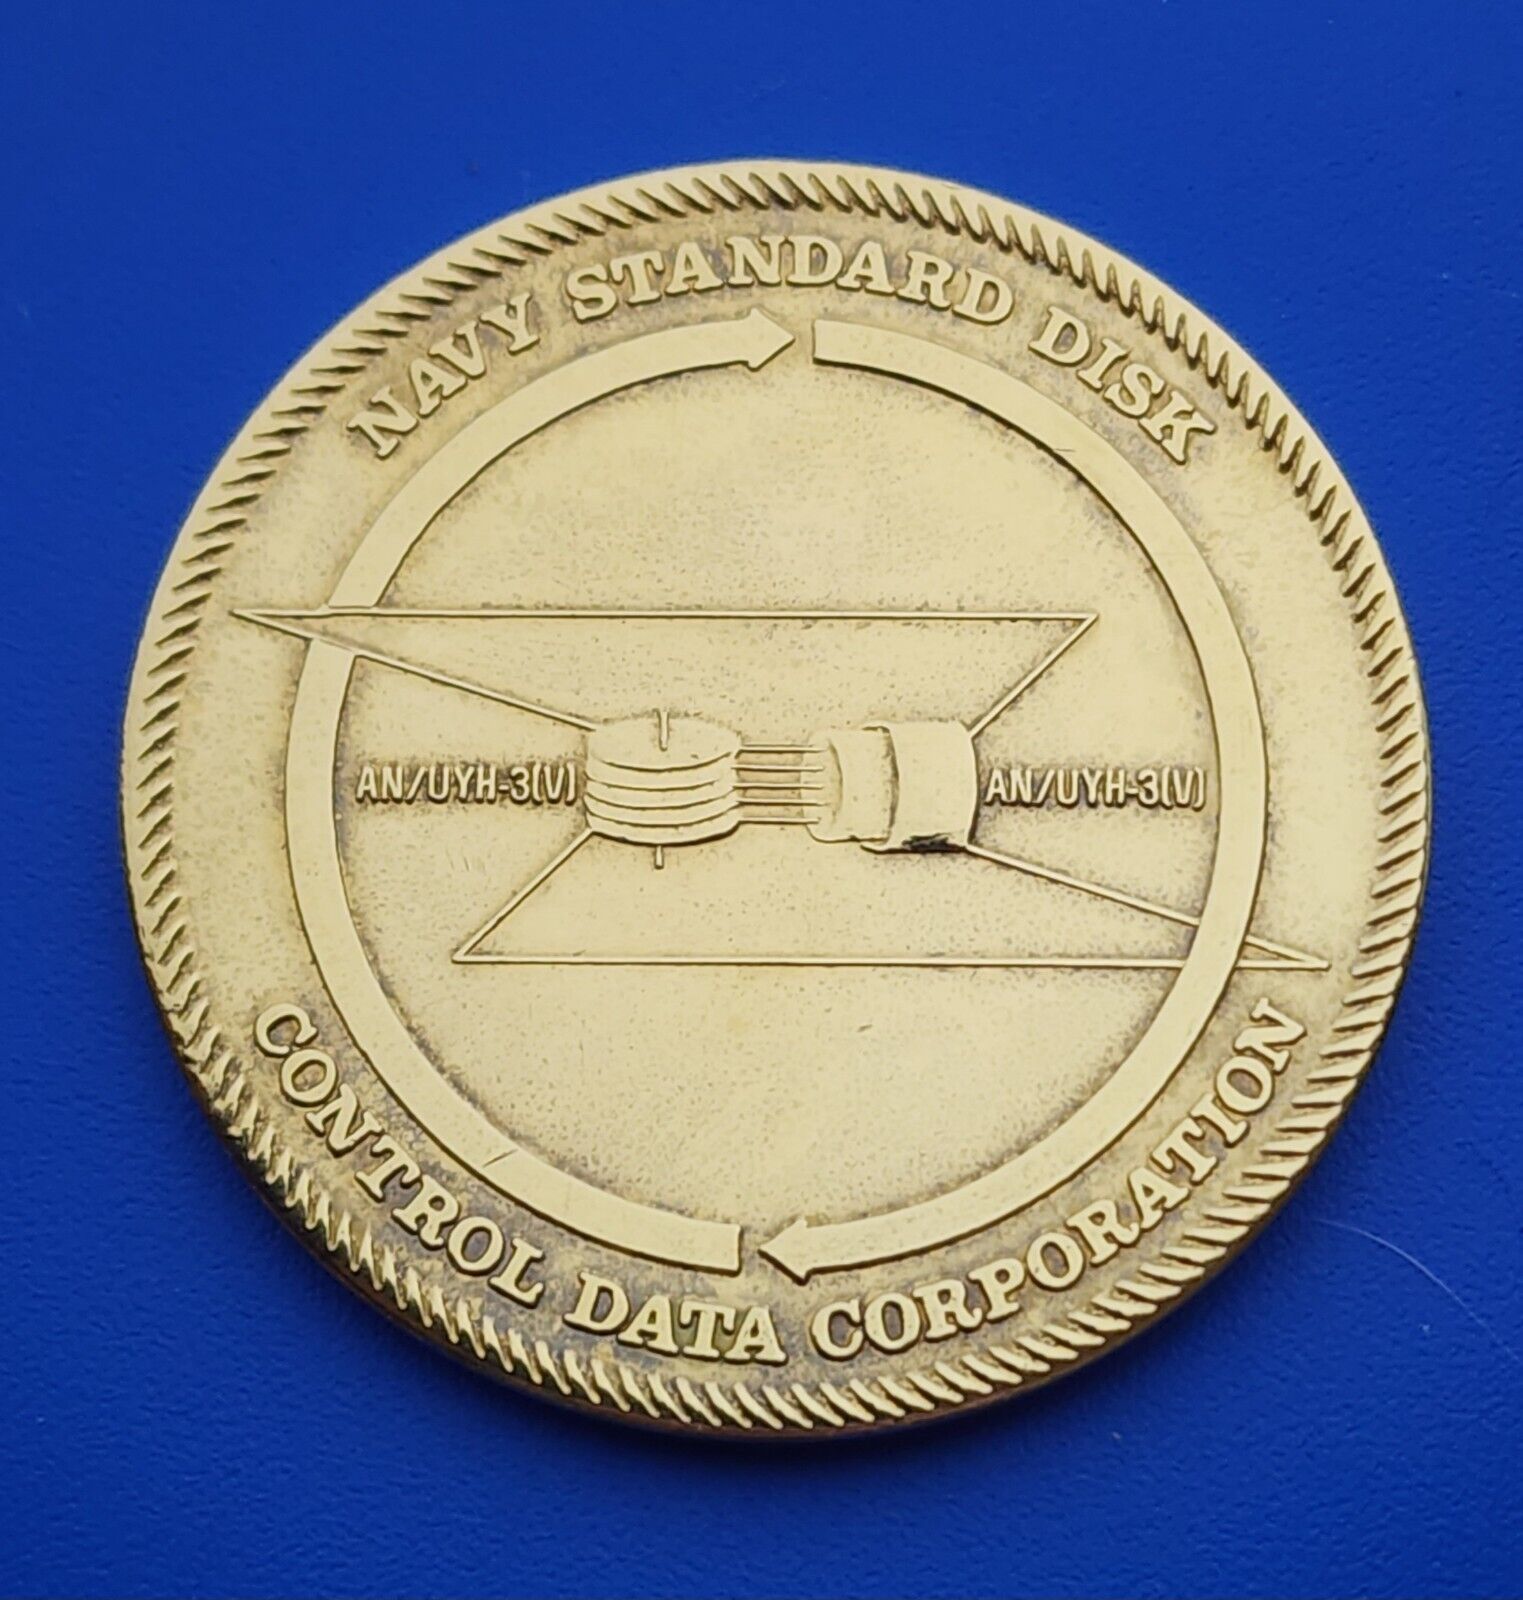 Control Data Corp Navy Standard Disk 100th Team Medal Award Challenge Coin 1983